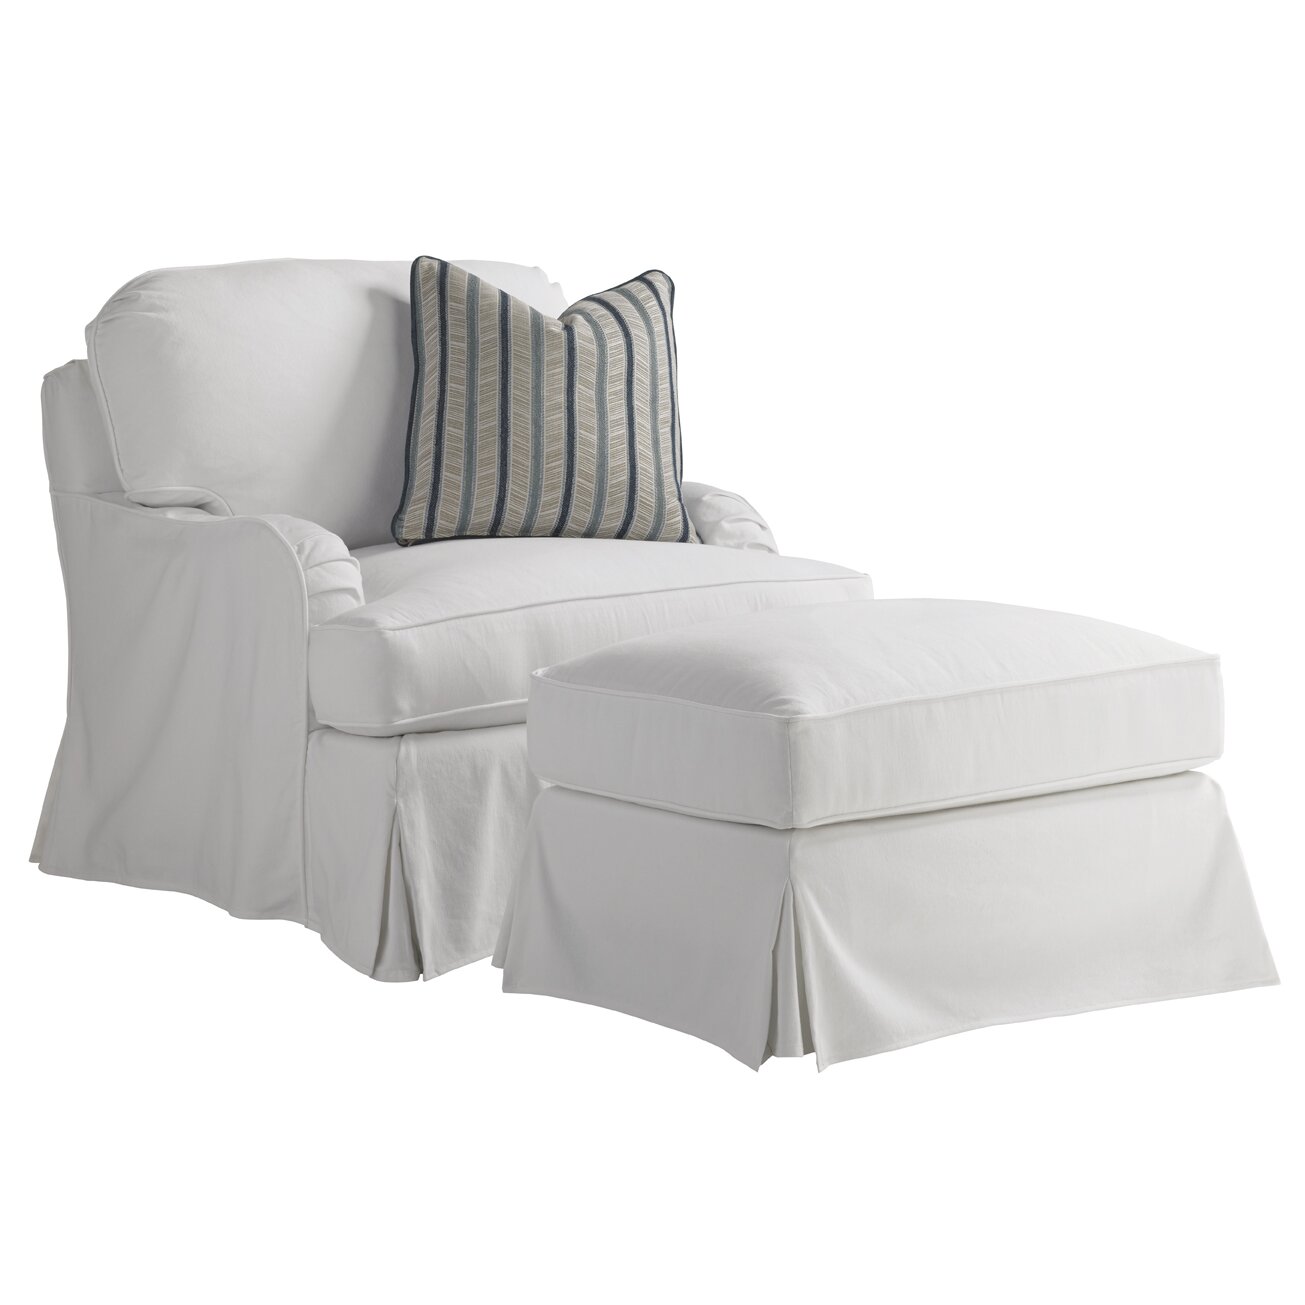 Coventry Hills Stowe Slipcover Arm Chair and Ottoman | Wayfair